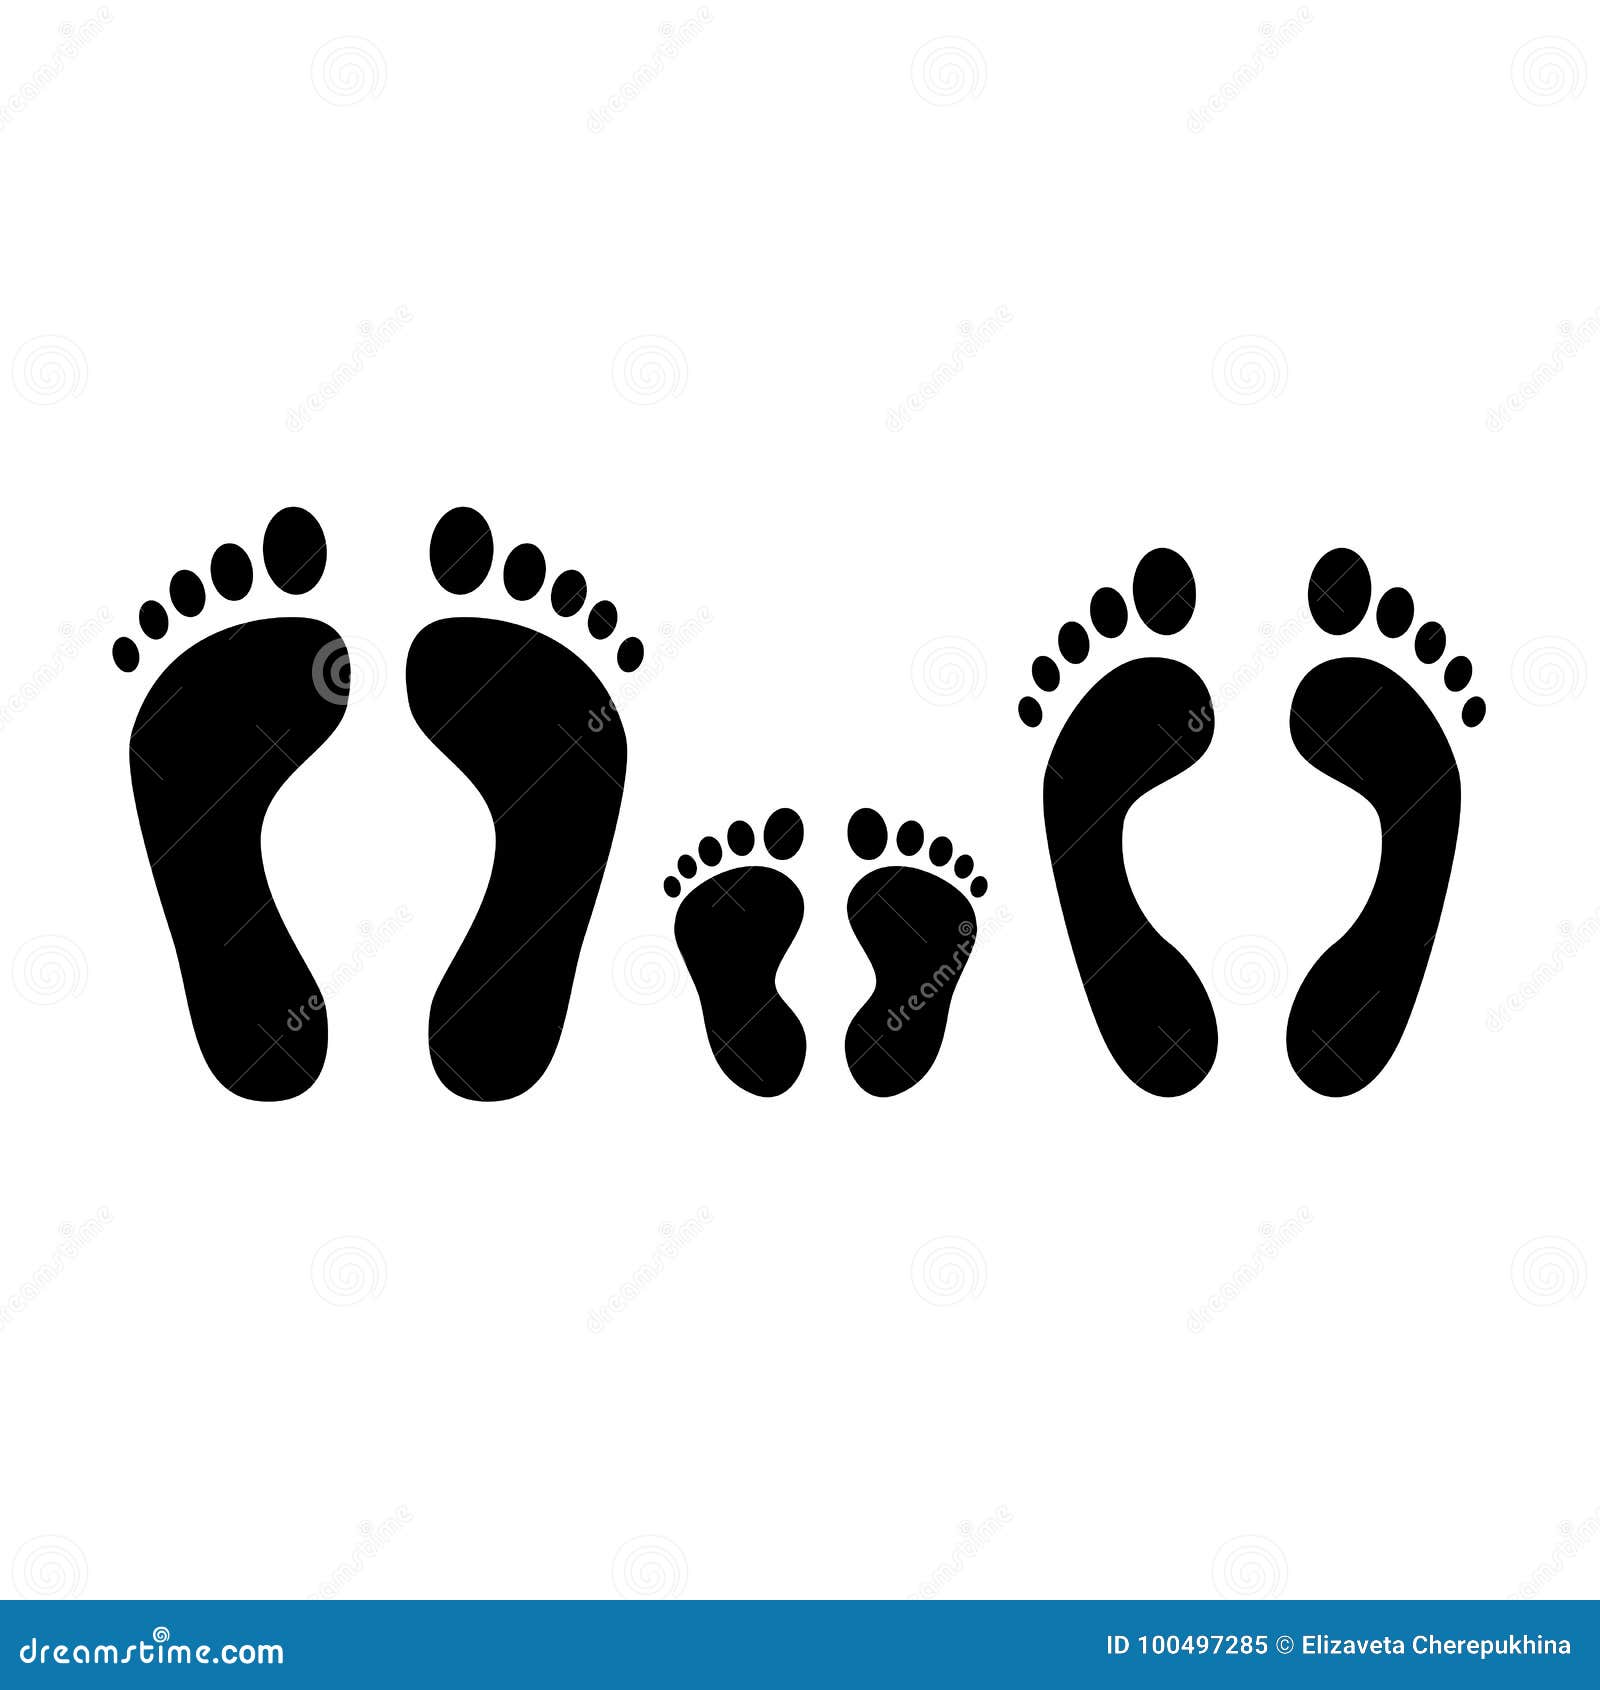 human footprint. black silhouette of man, woman and baby footprints. family.  icons  on white